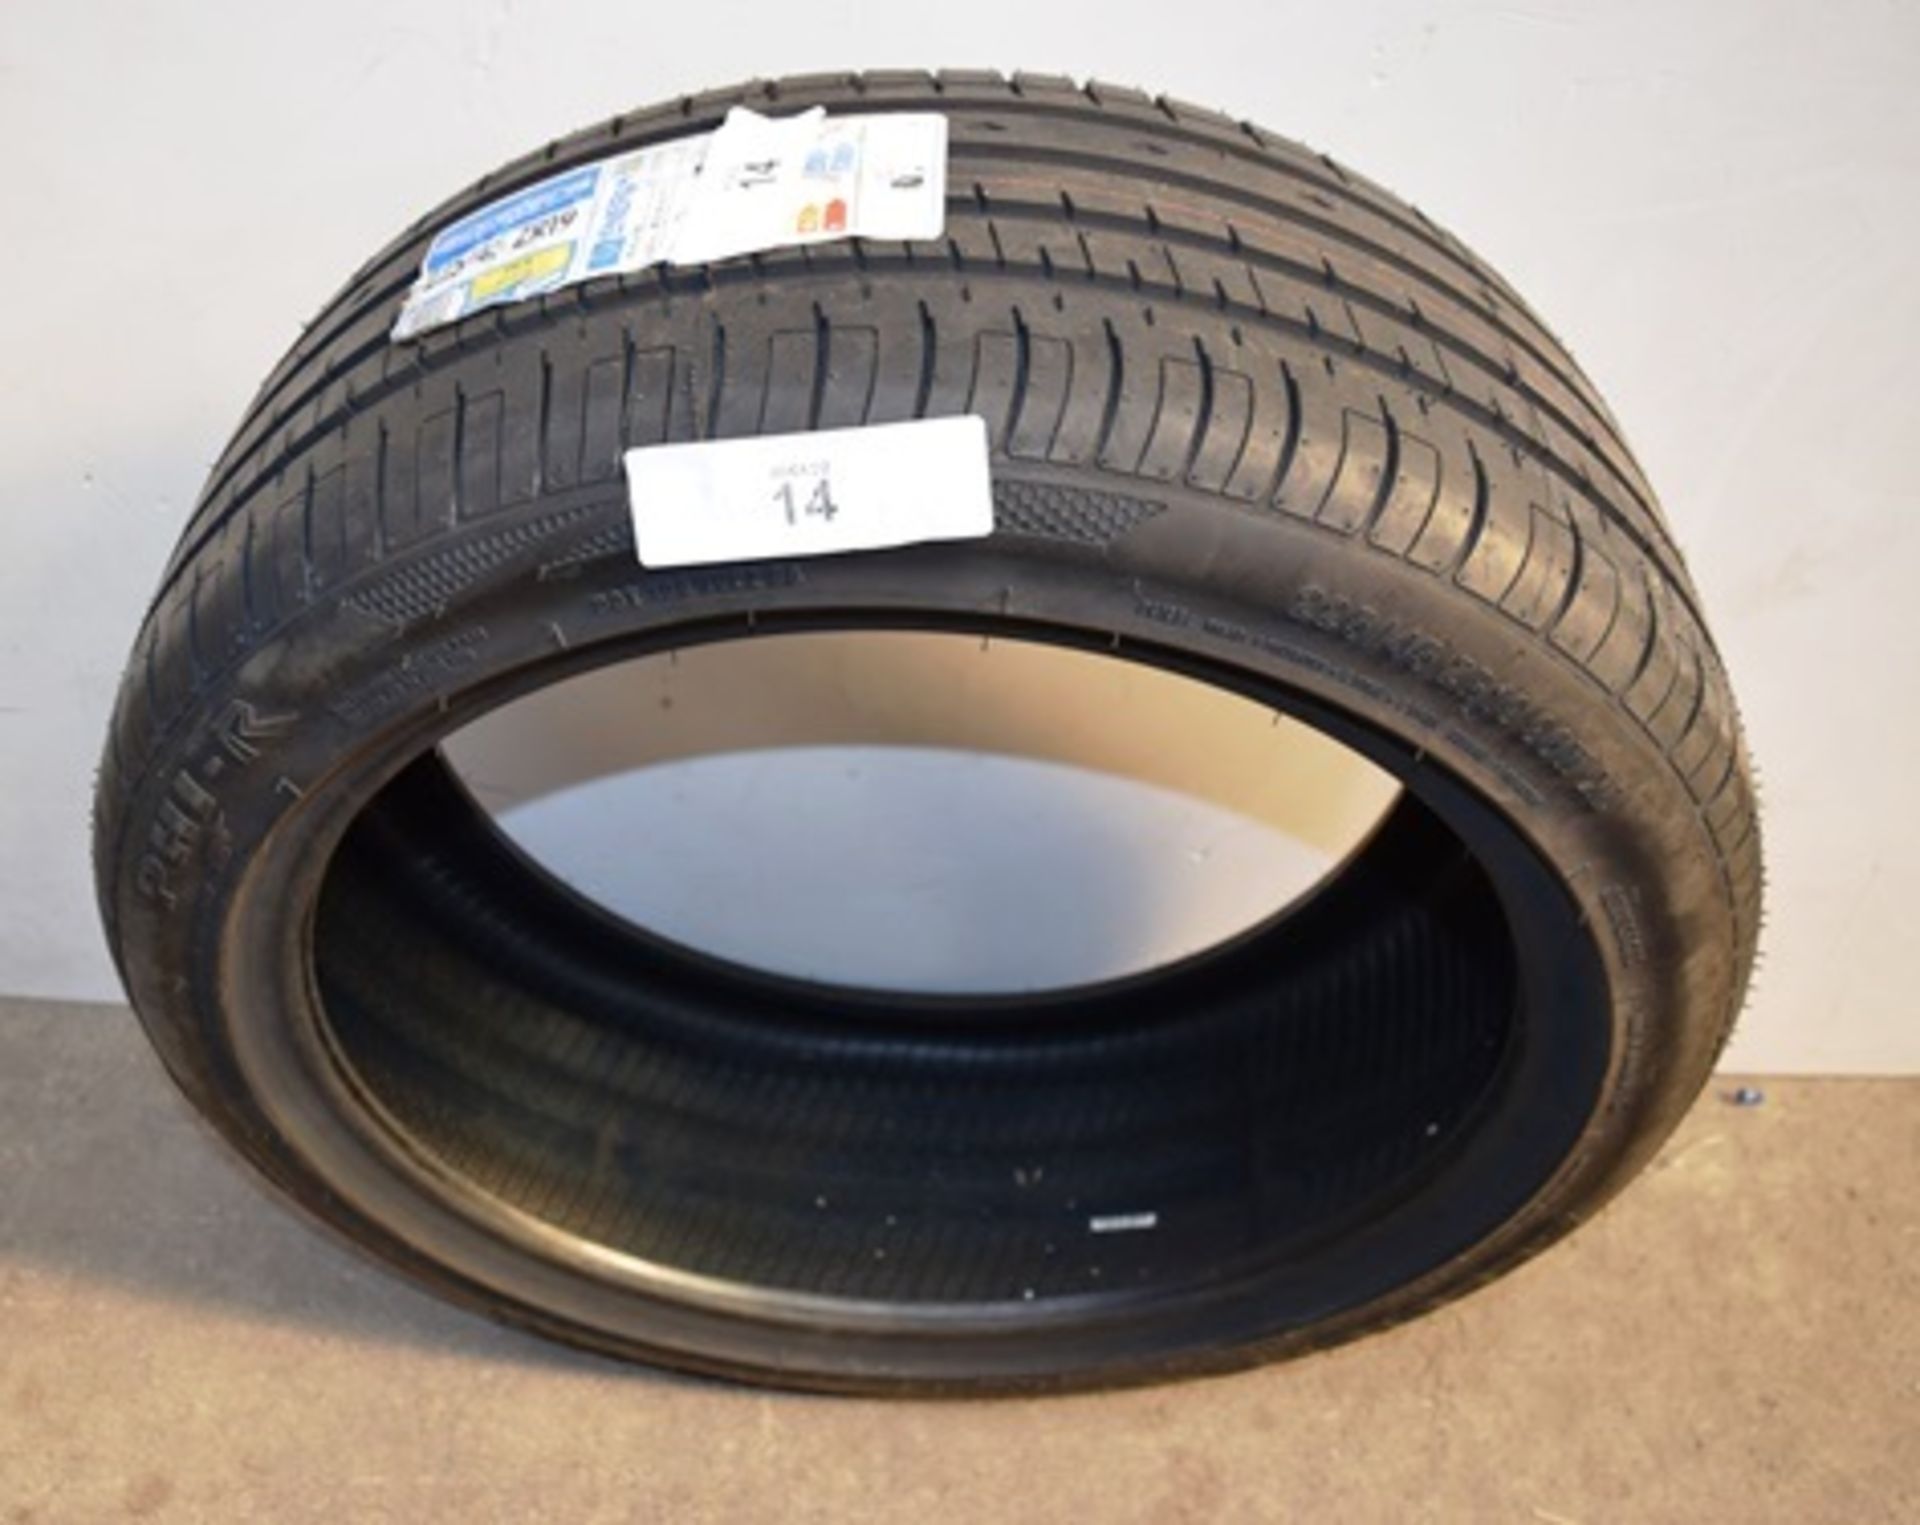 1 x Accelera PHI R tyre, size 225/45Z R19 96W XL - New (GS2) - Image 2 of 2